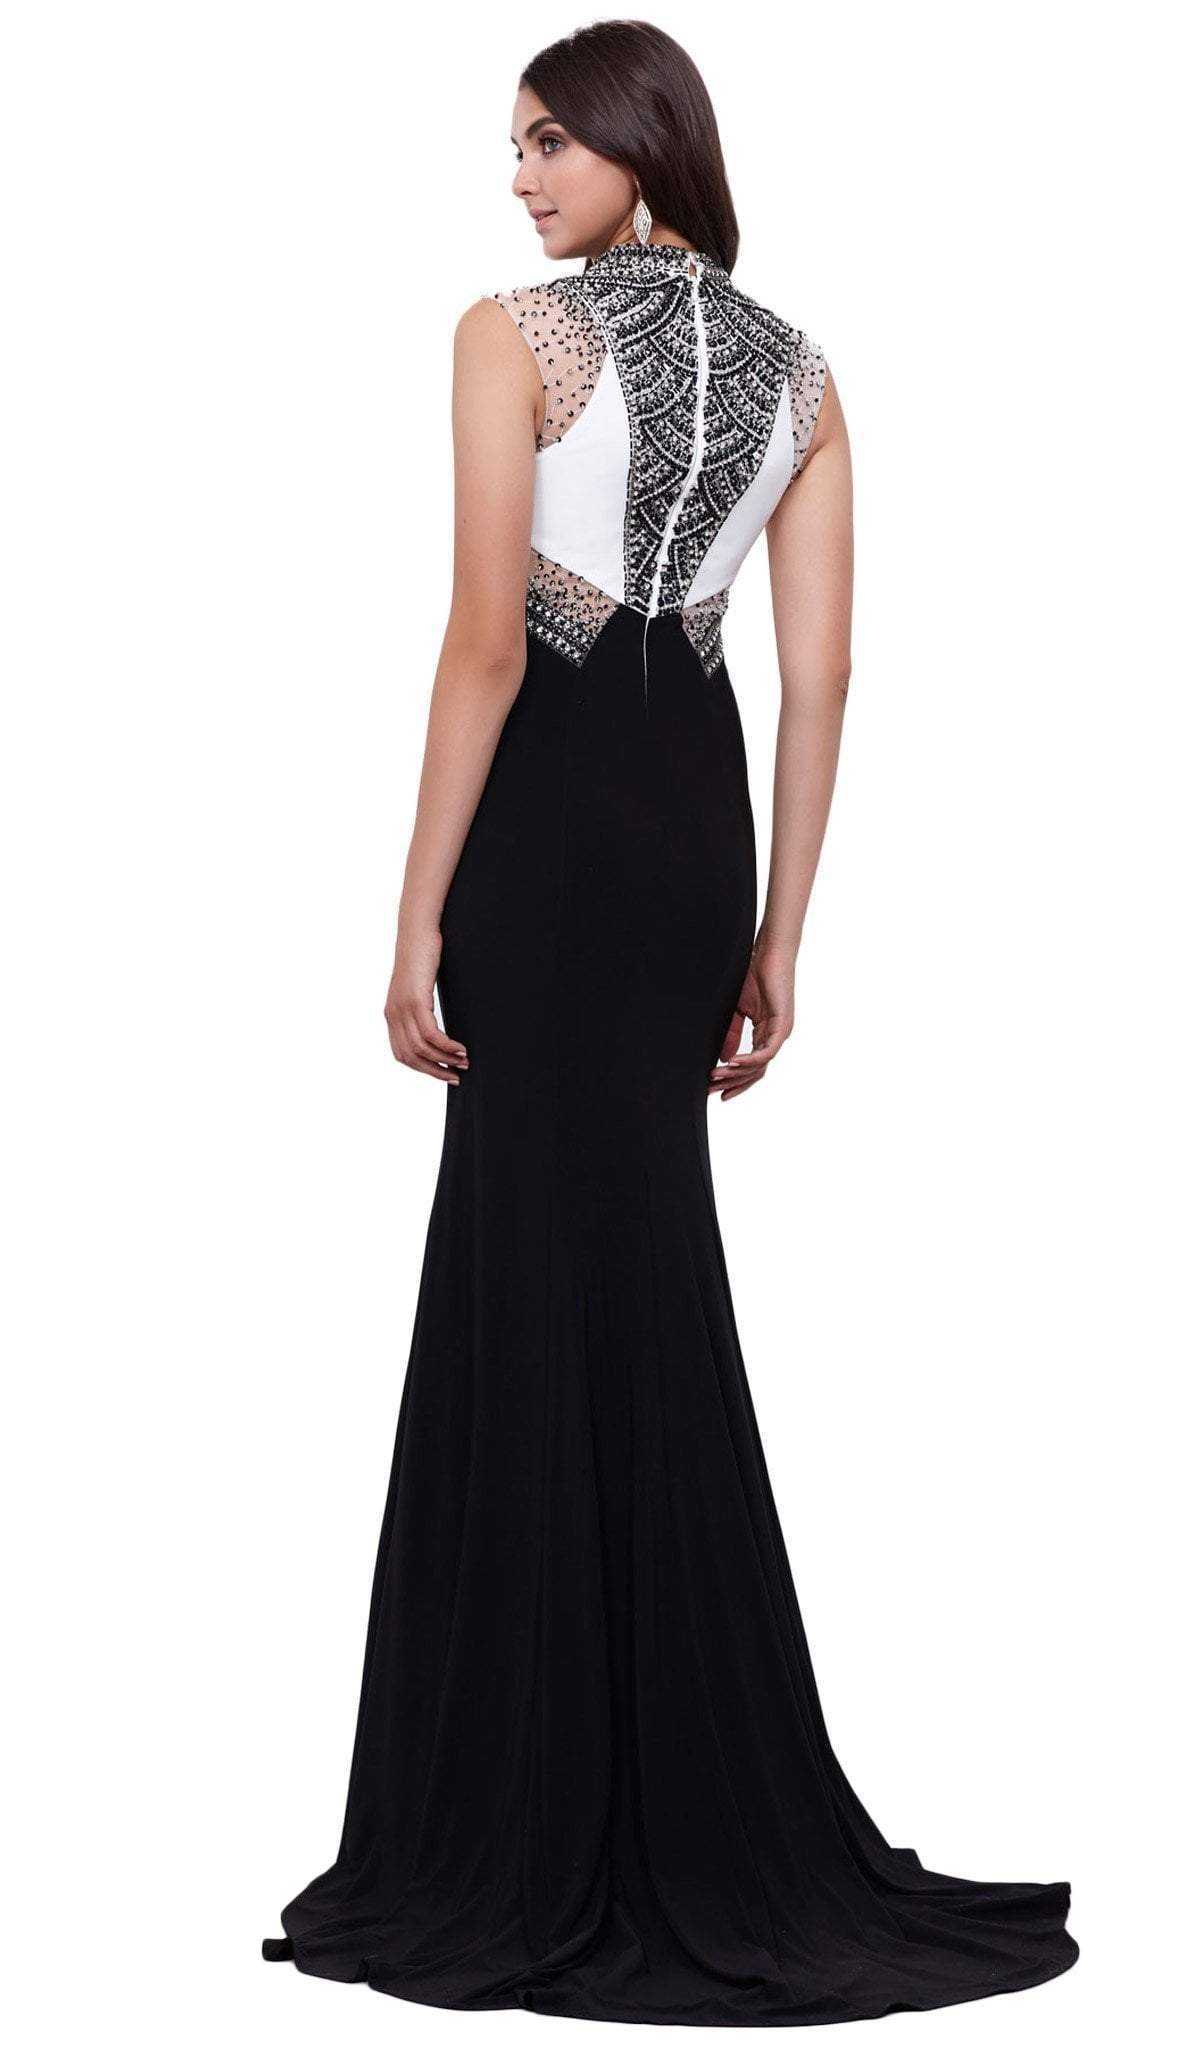 Nox Anabel - 8364 Contrast Jewel Illusion Paneled Evening Gown Special Occasion Dress